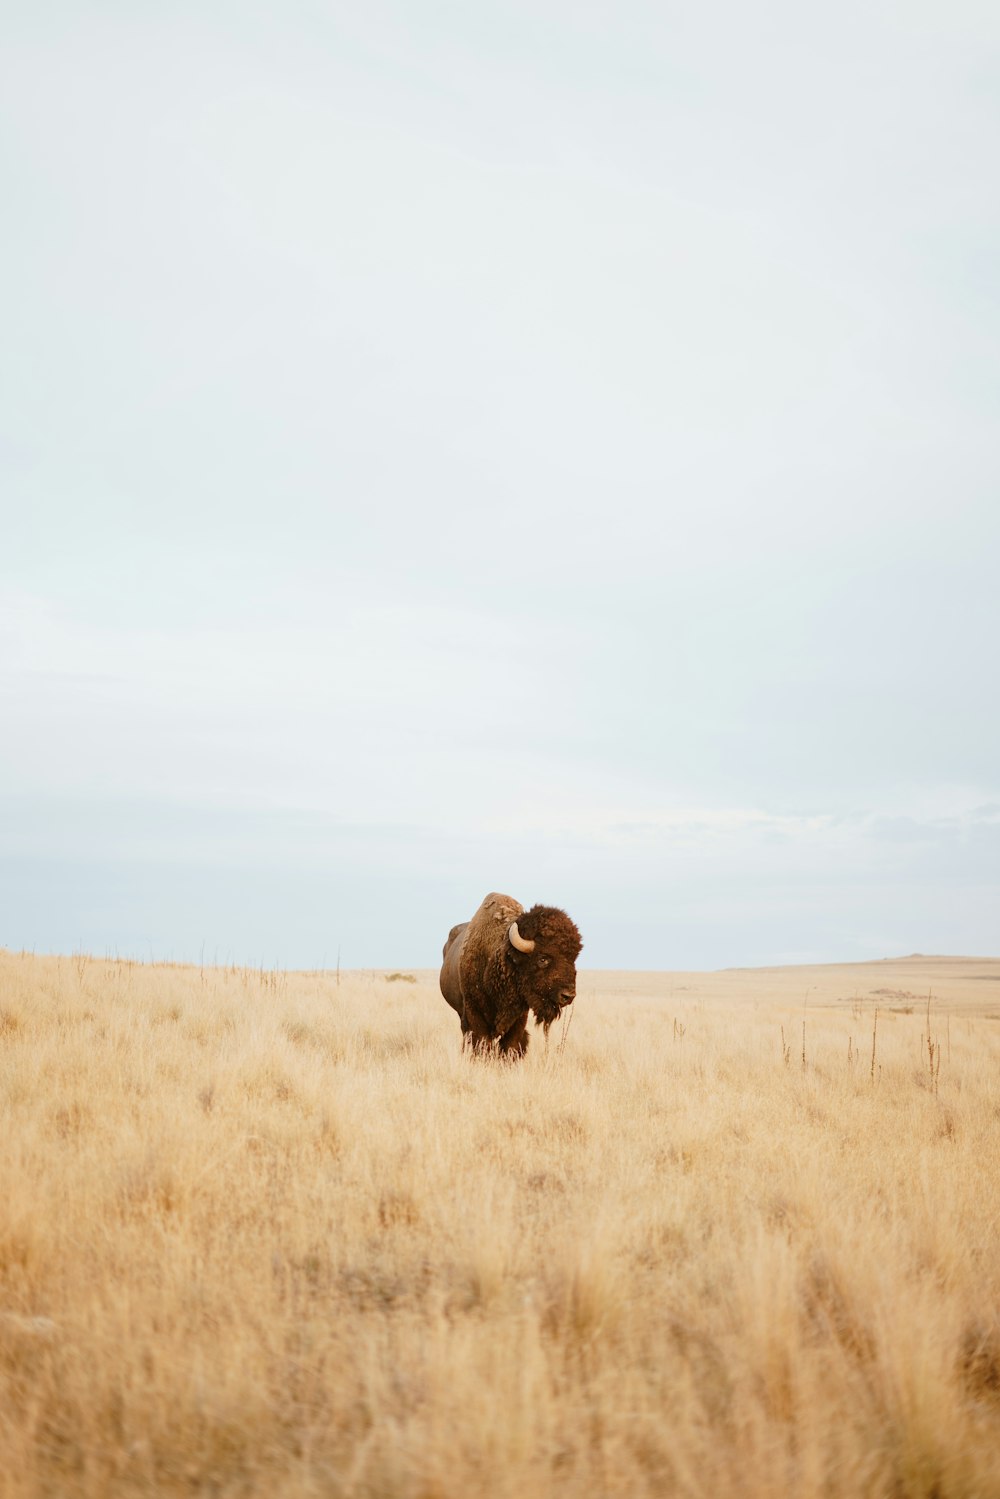 bison standing on brown field during daytime